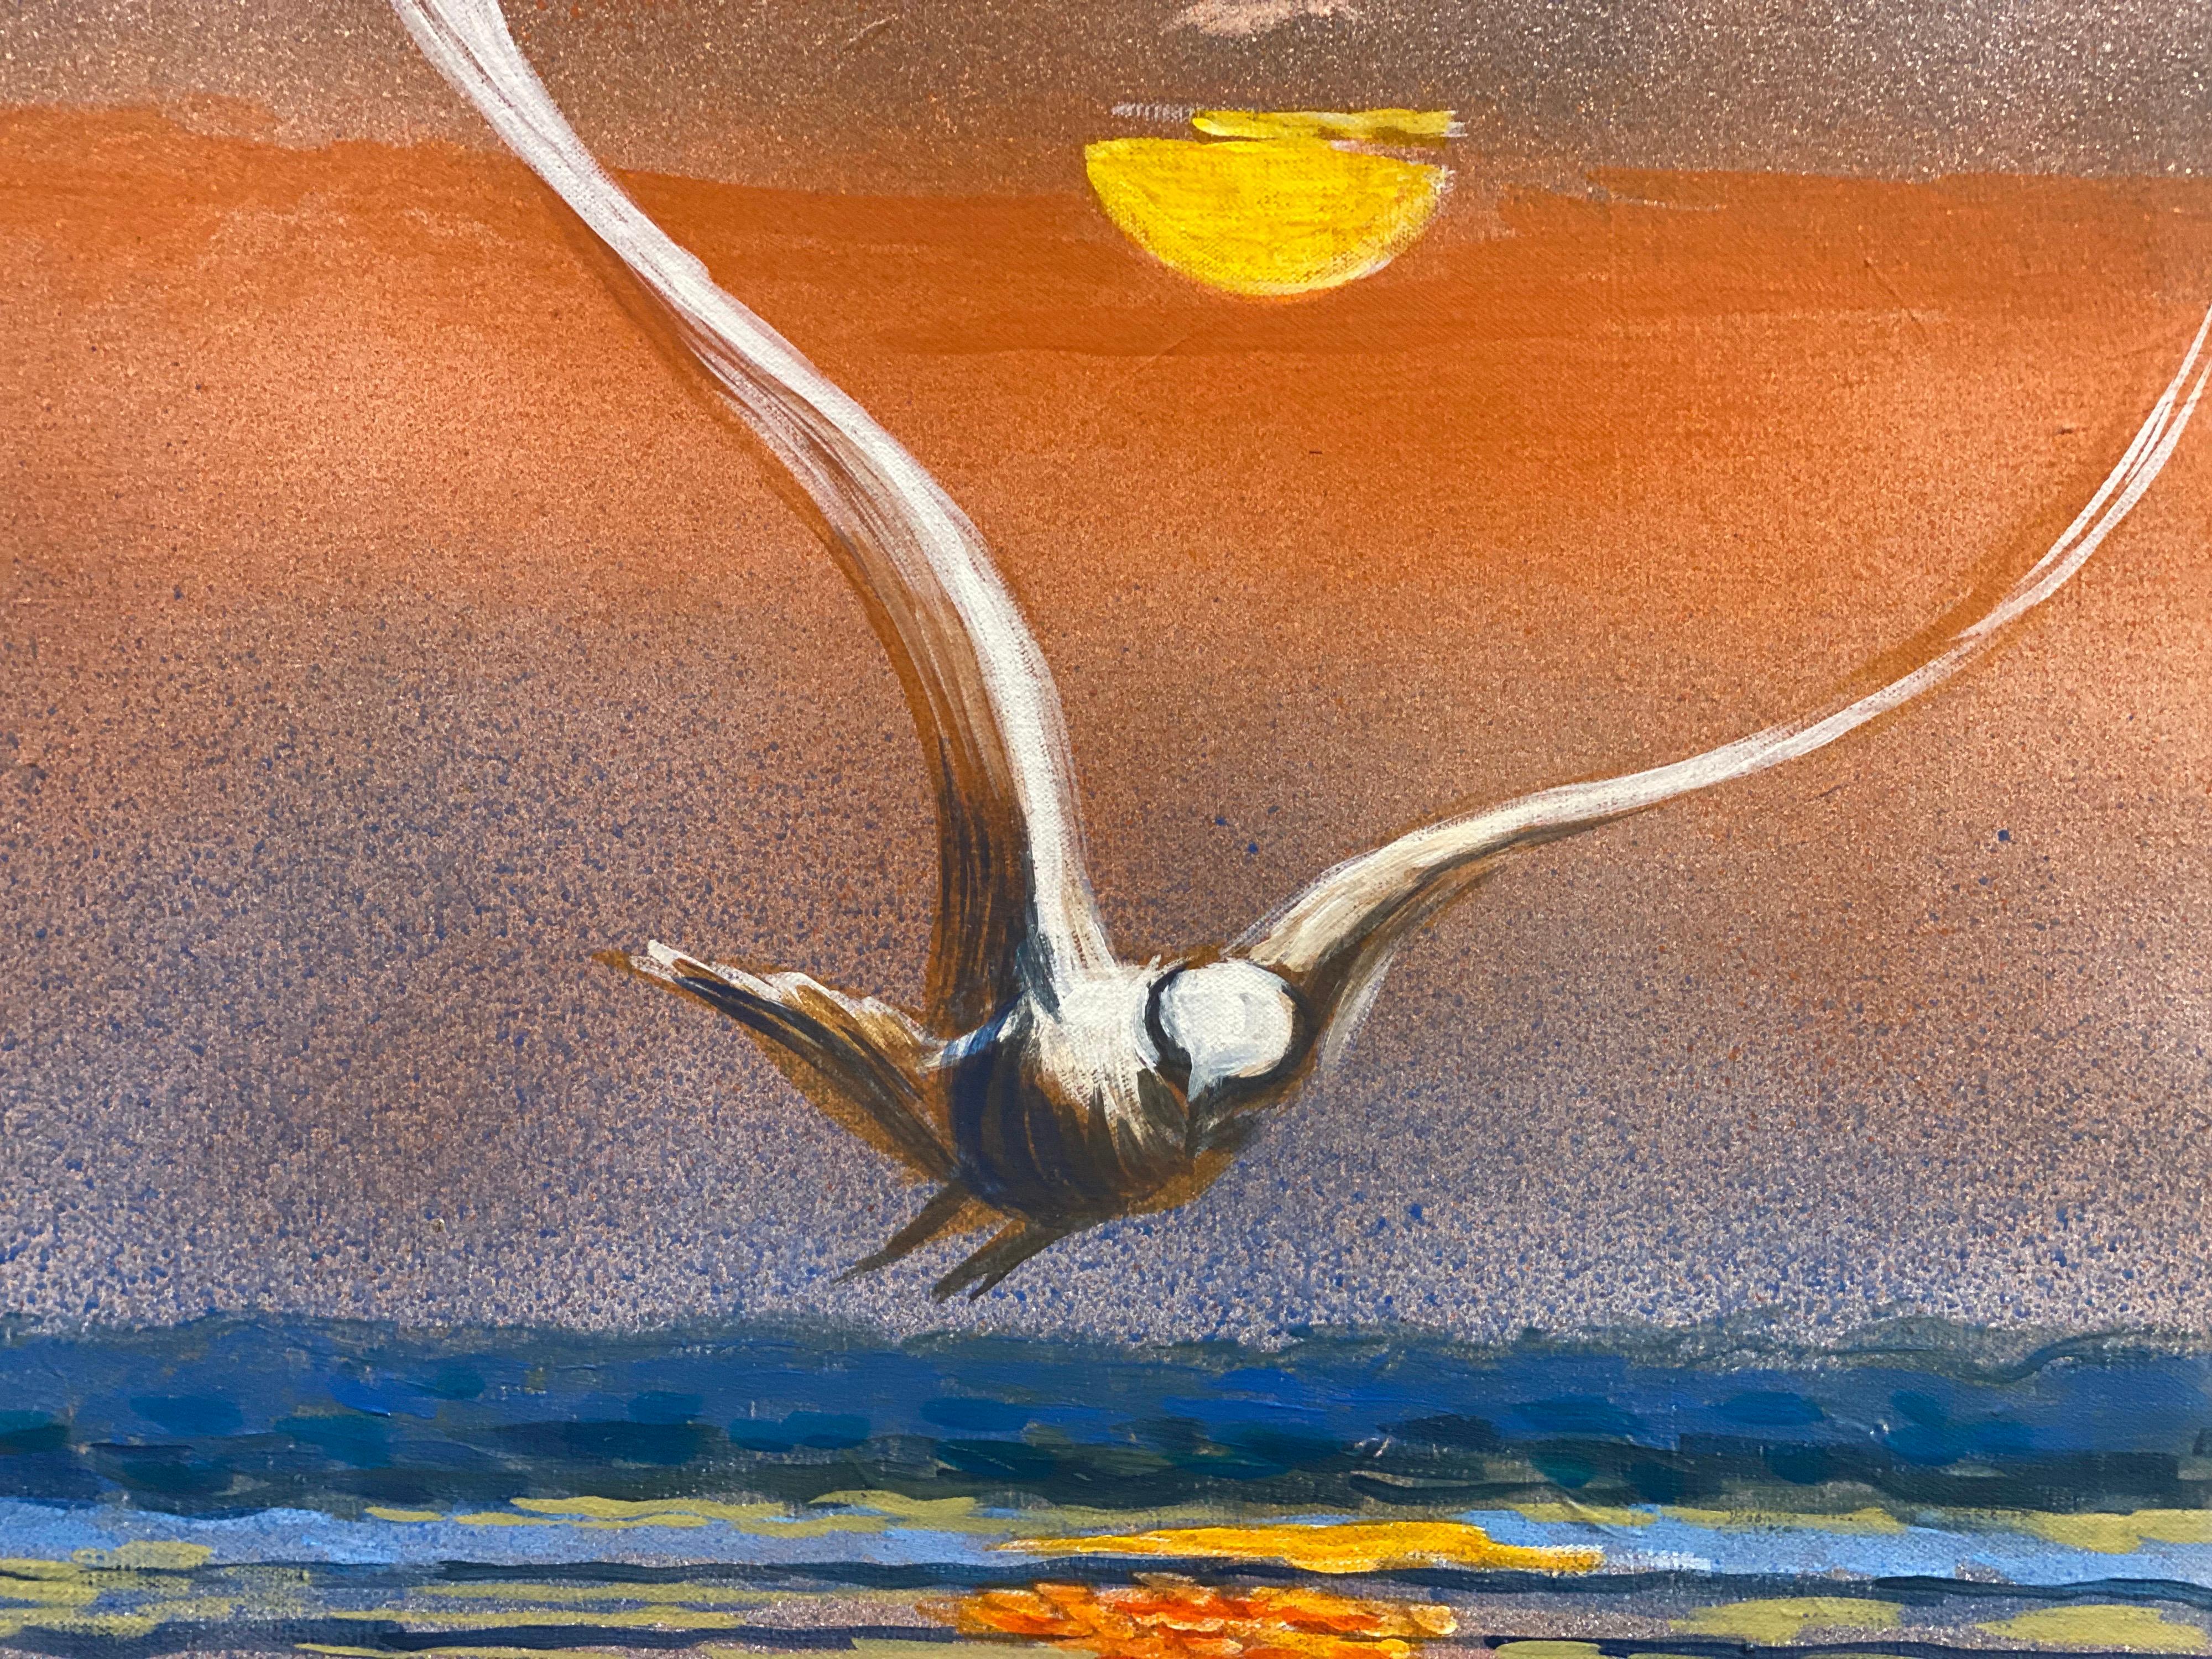 Artist/ School: French School, signed and dated verso 1976

Title: Sunset Seagull

Medium: oil painting on canvas, unframed 

canvas: 18.5 x 24 inches

Provenance: private collection, France

Condition: The painting is in overall very good and sound